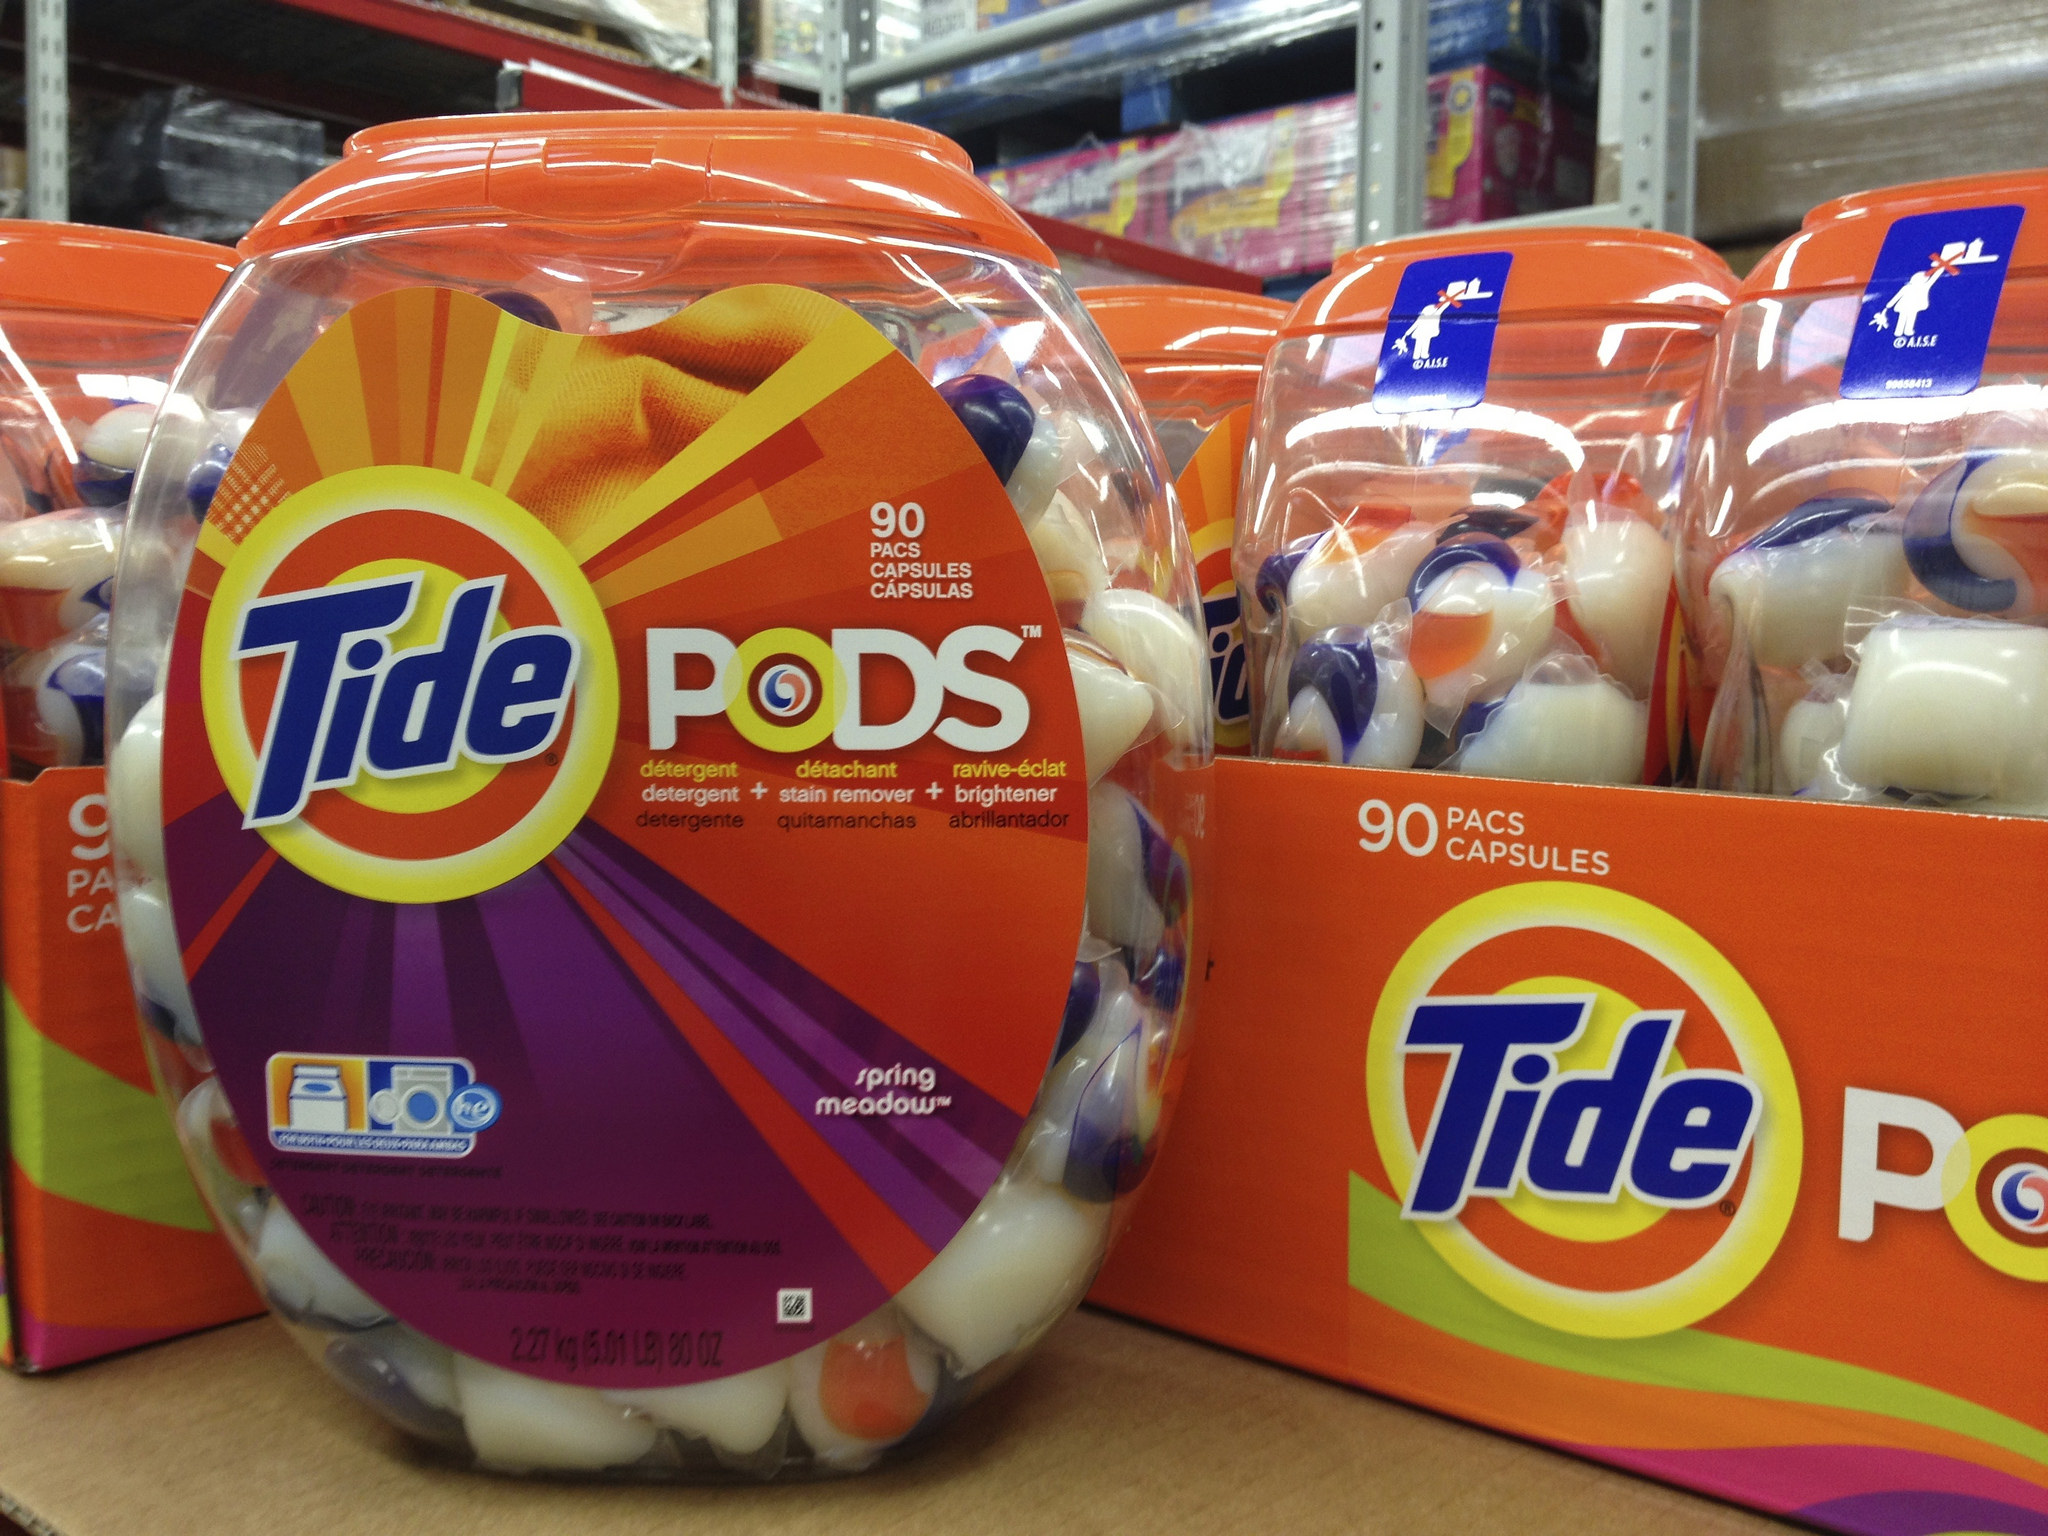 Tide Pod Challenge Calls Attention To Home Poisoning Risks Farm